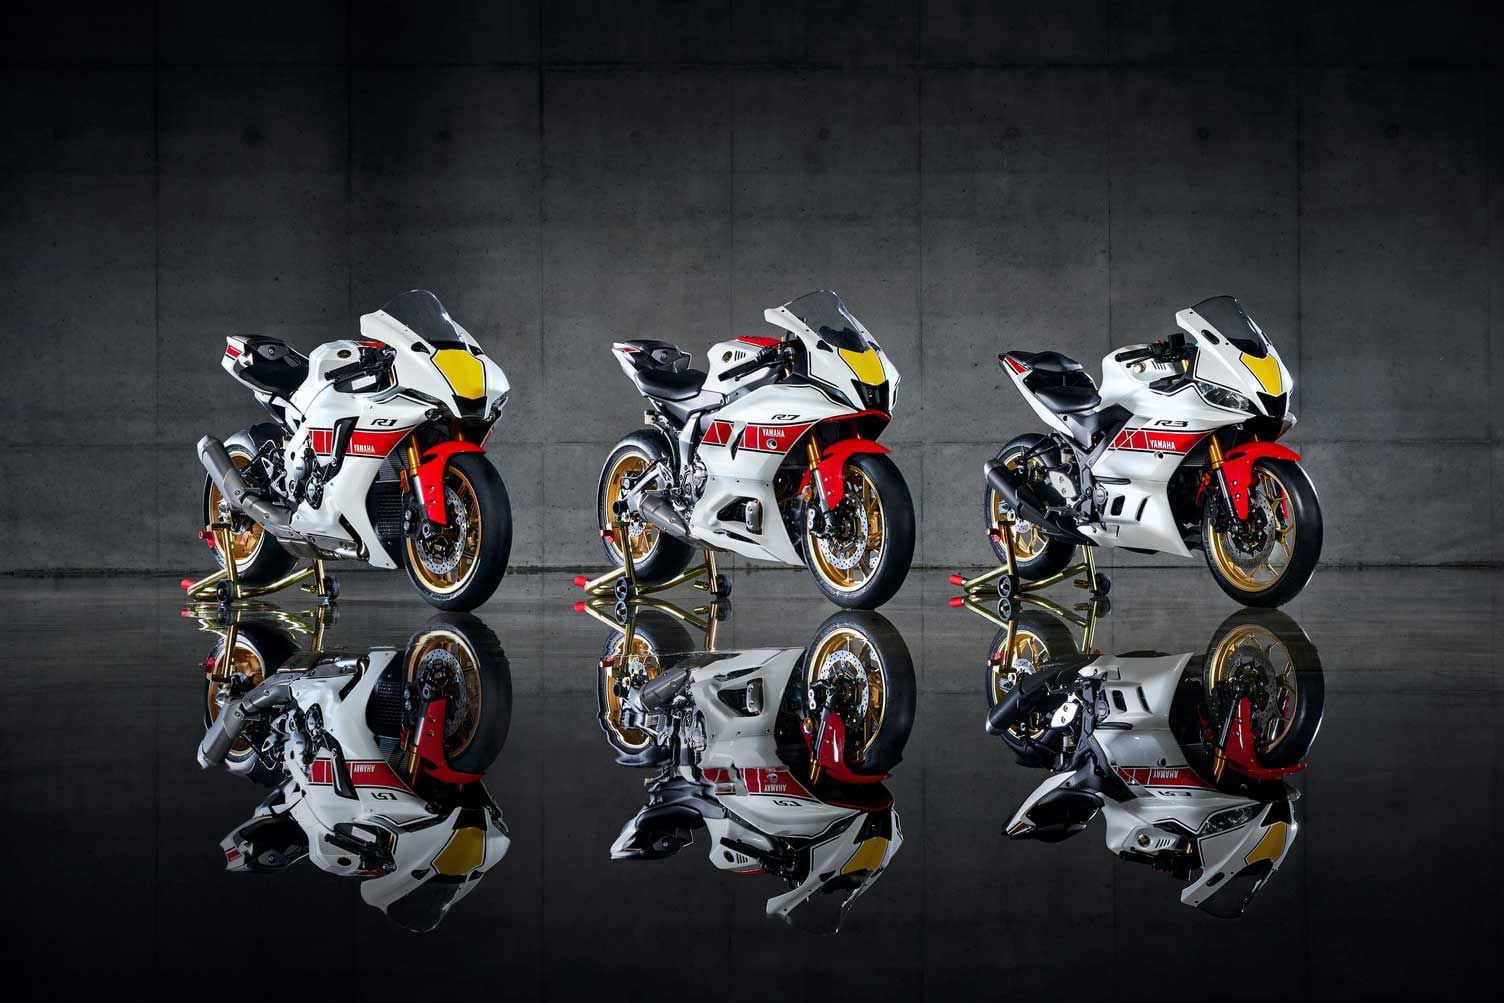 For 2022 Yamaha’s R1, R7, and R3 models are available with the special anniversary race livery.